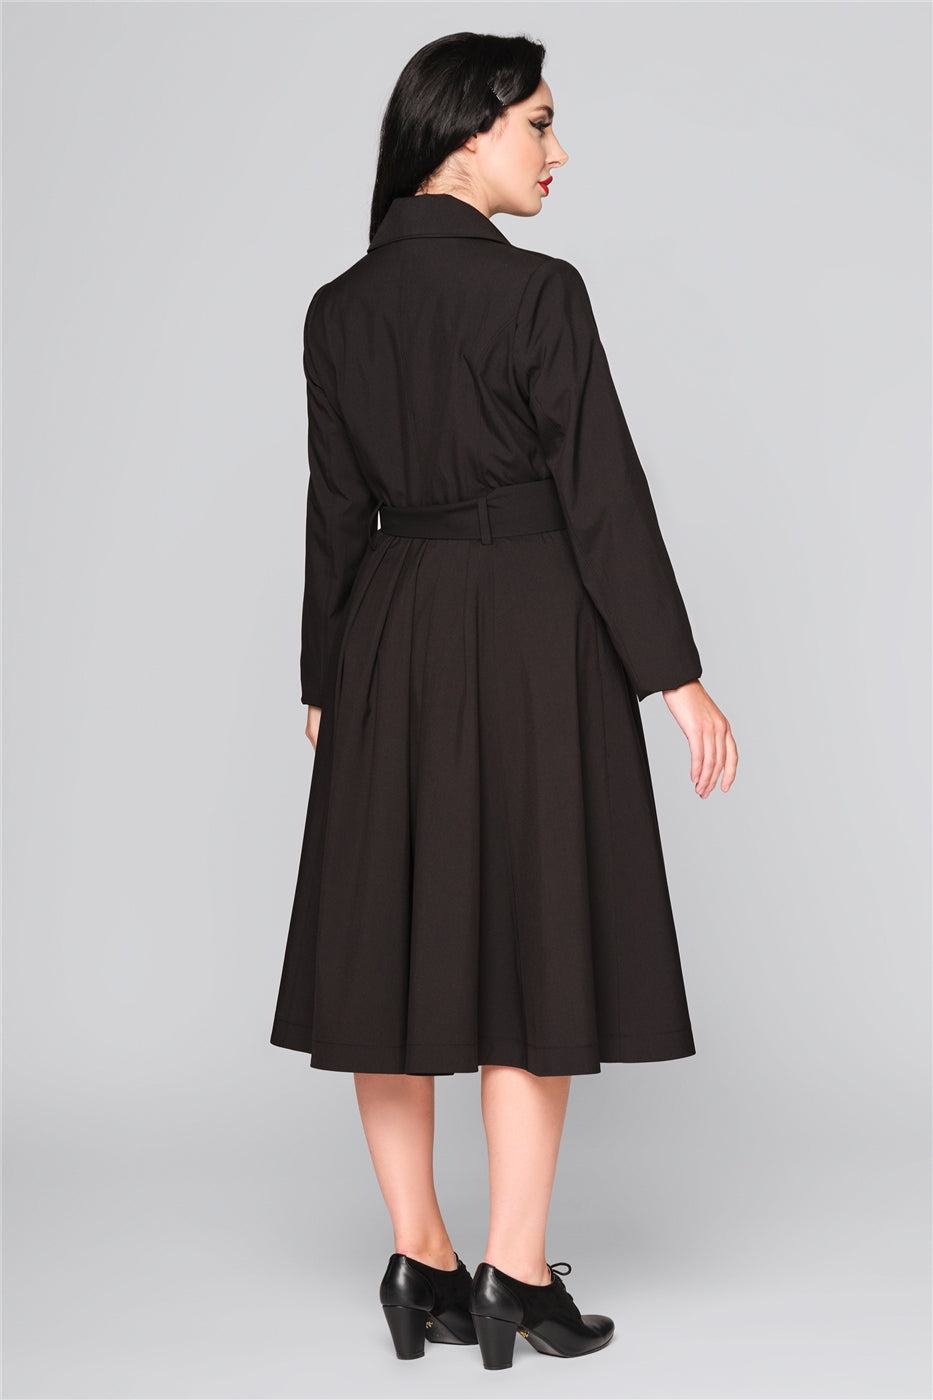 Korrina Black Trench Coat by Collectif